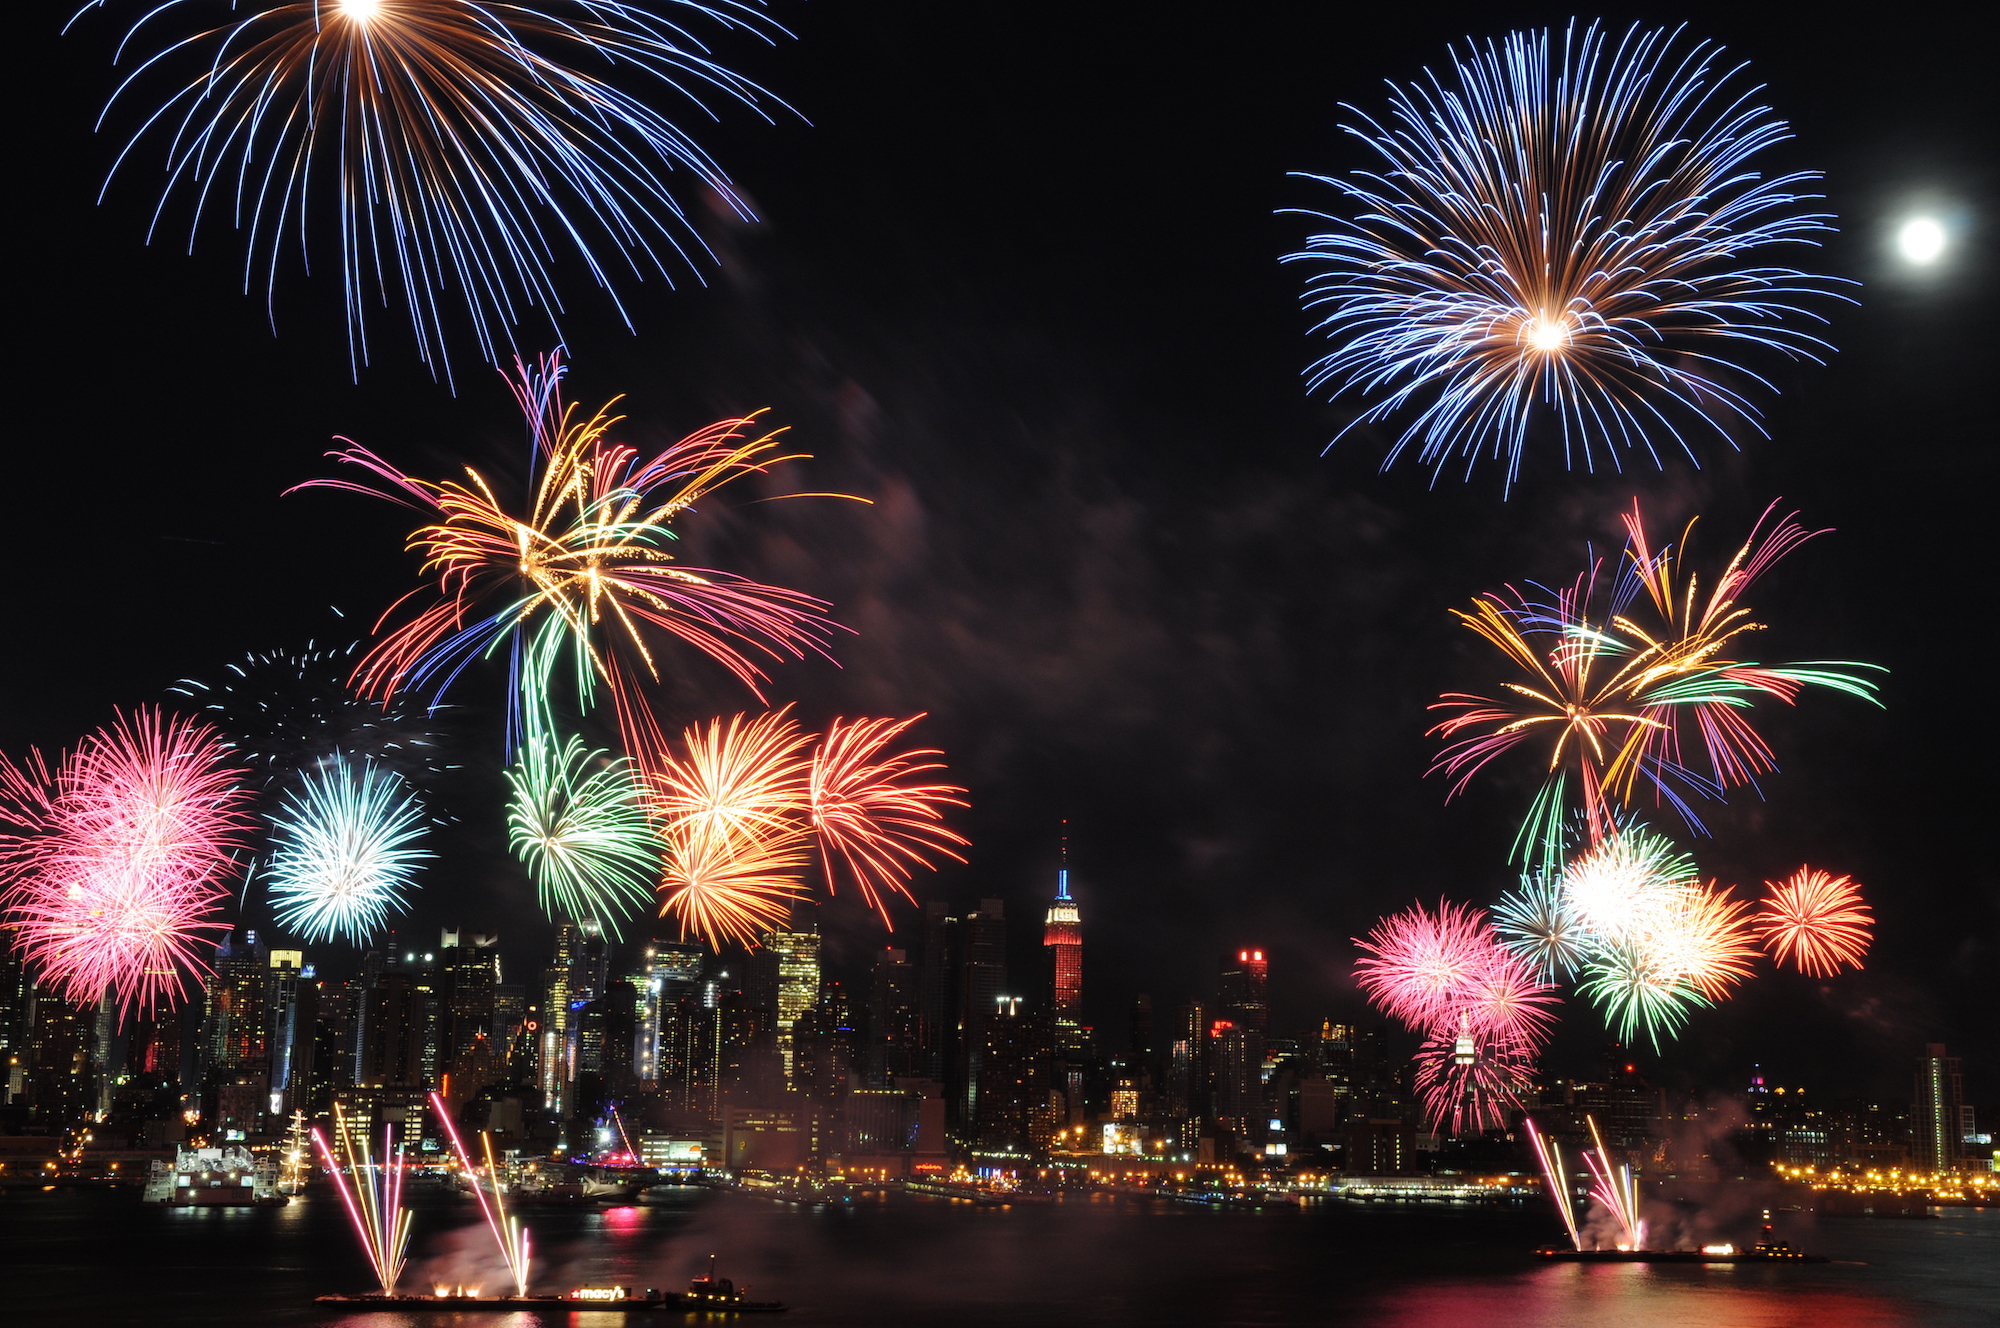 Your guide to getting around NYC on the Fourth of July